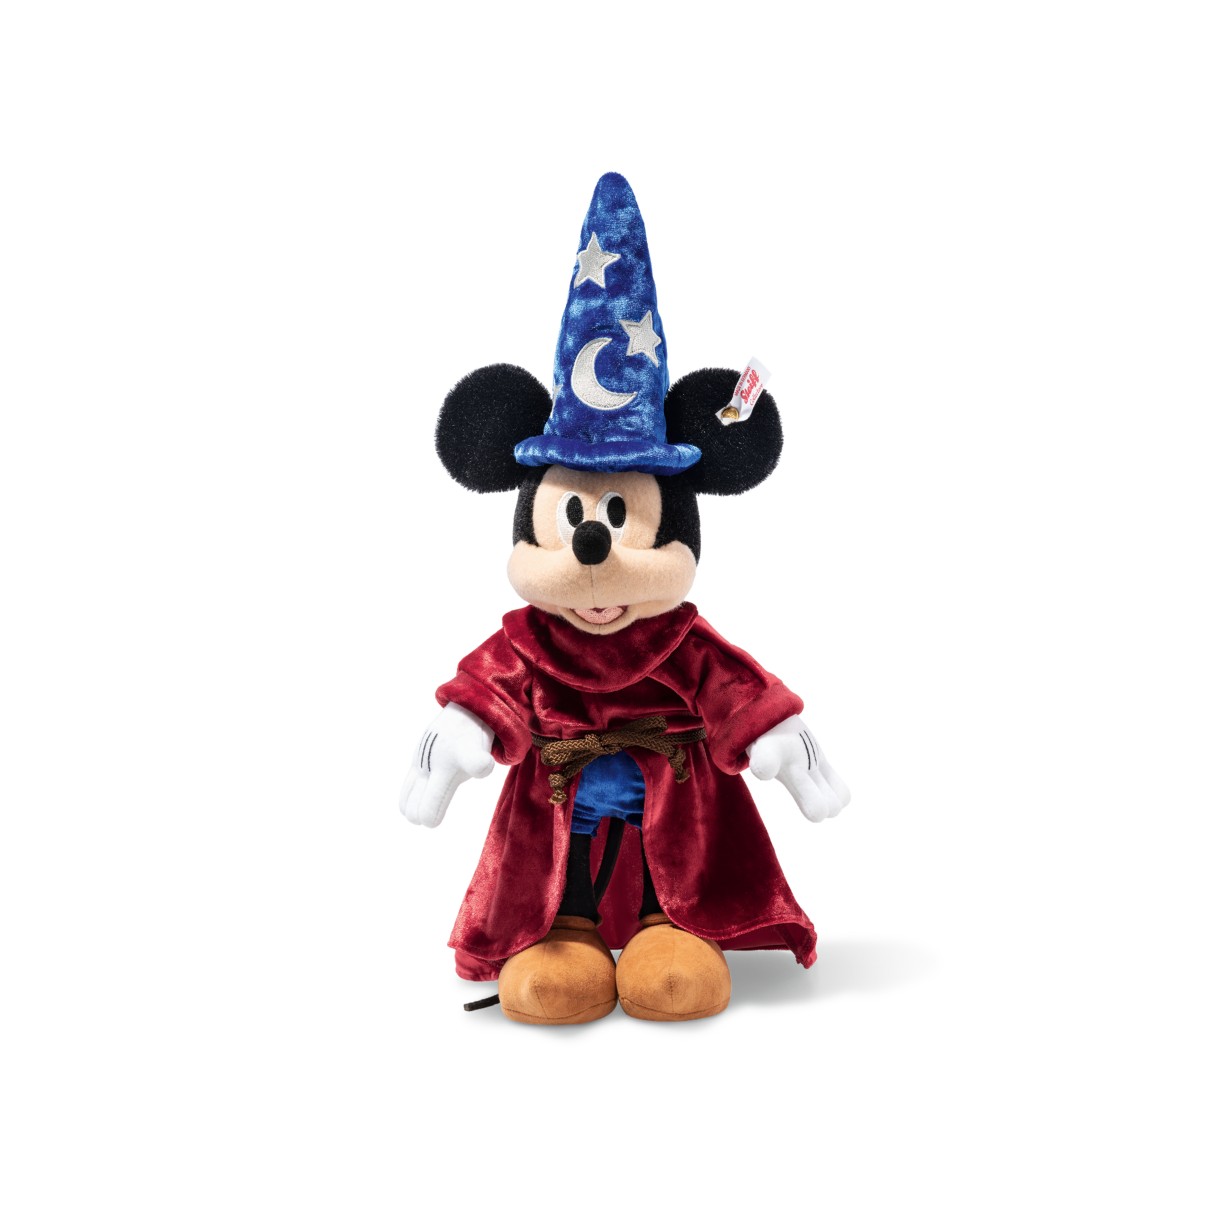 Sorcerer Mickey Mouse Collectible by Steiff – 12'' – Limited Edition